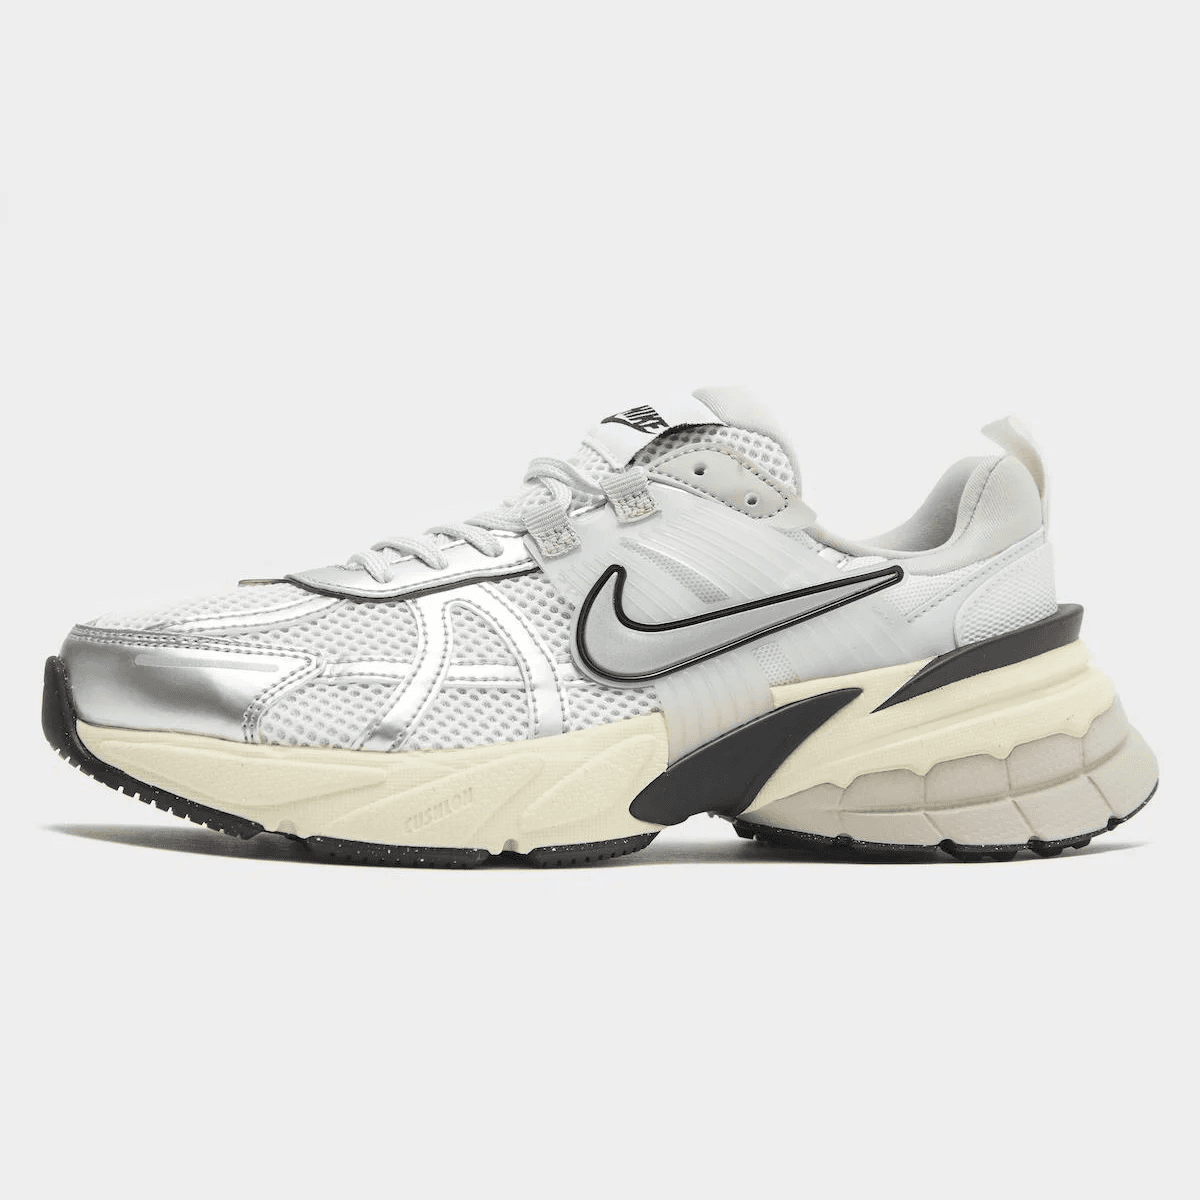 In Case We Need Another Dad Shoe The New Nike Runtekk Is Here